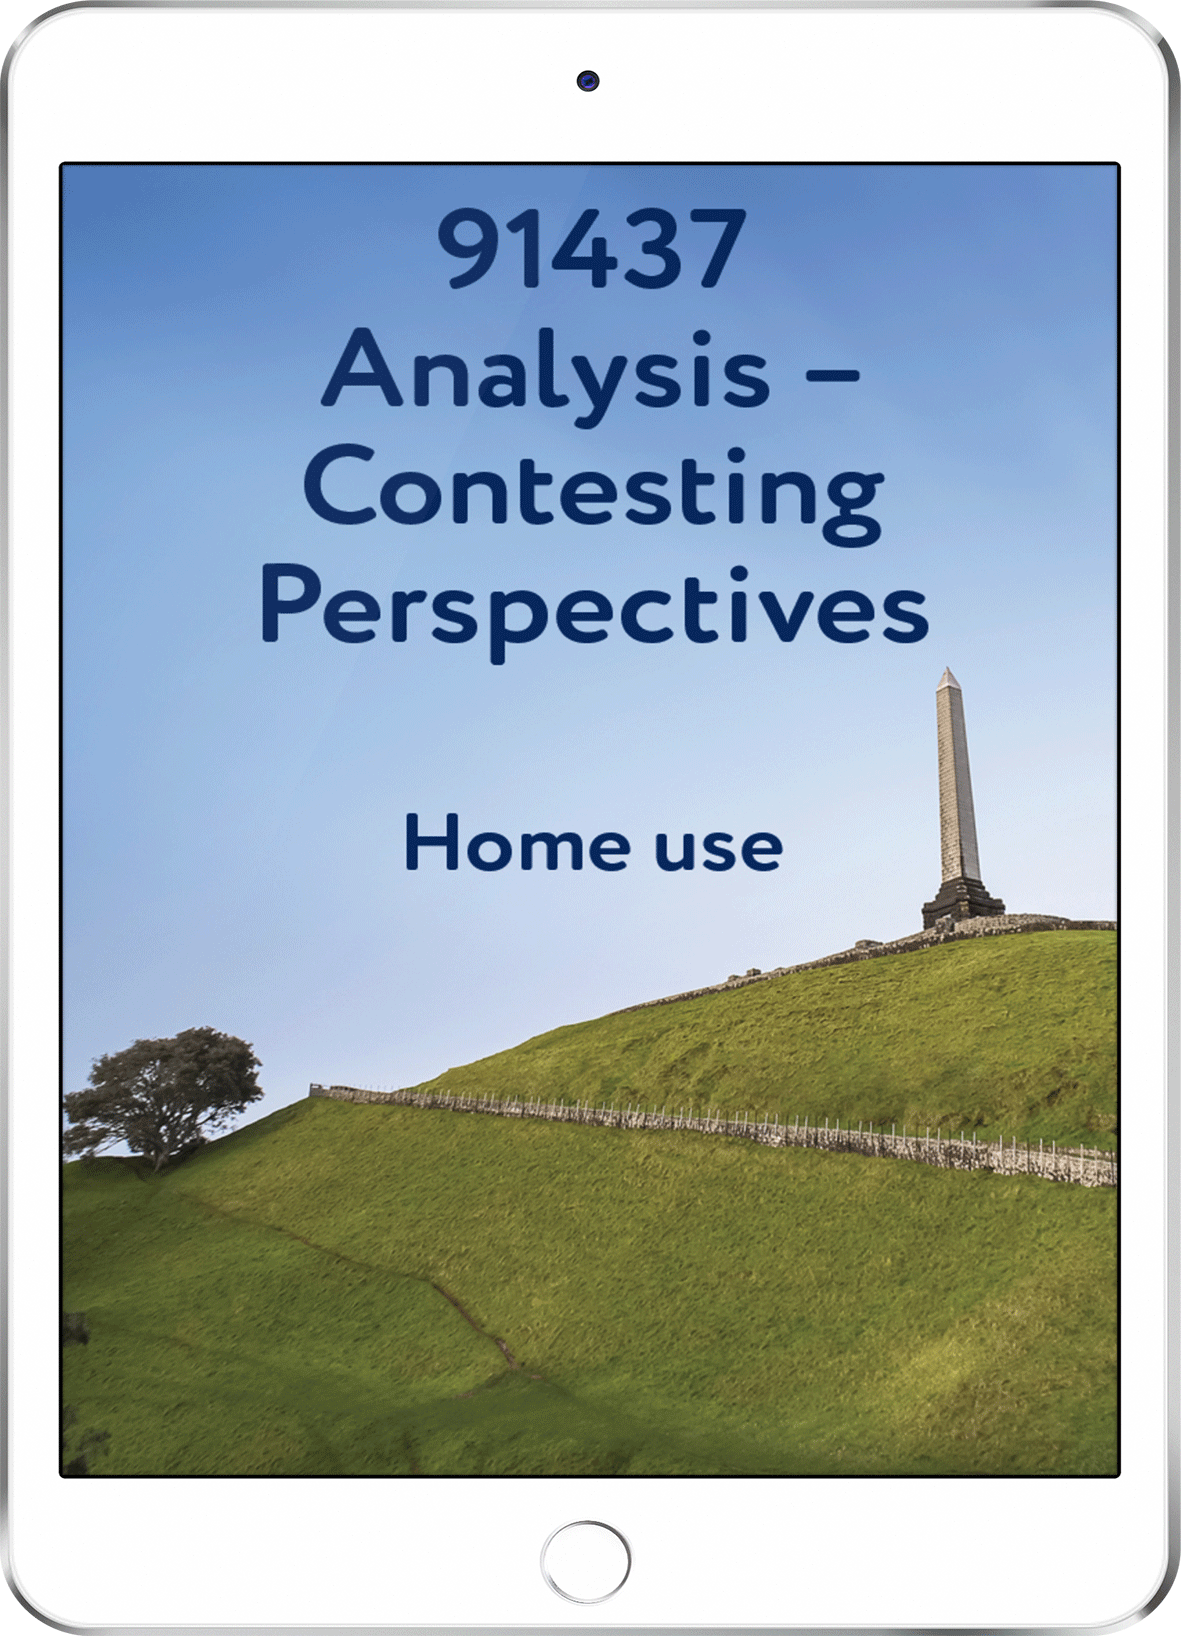 91437 Analysis - Contesting Perspectives - Home Use